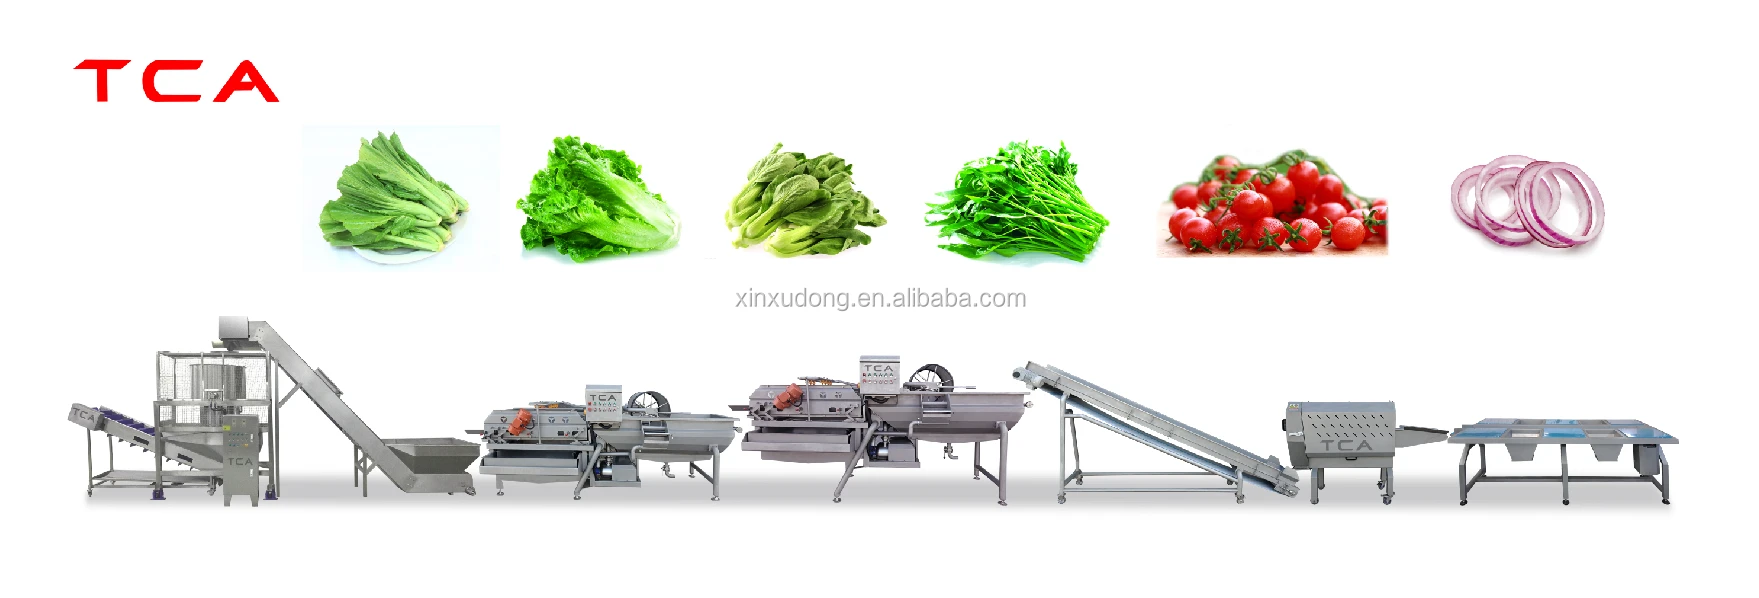 TCA vegetables processing and packaging machines